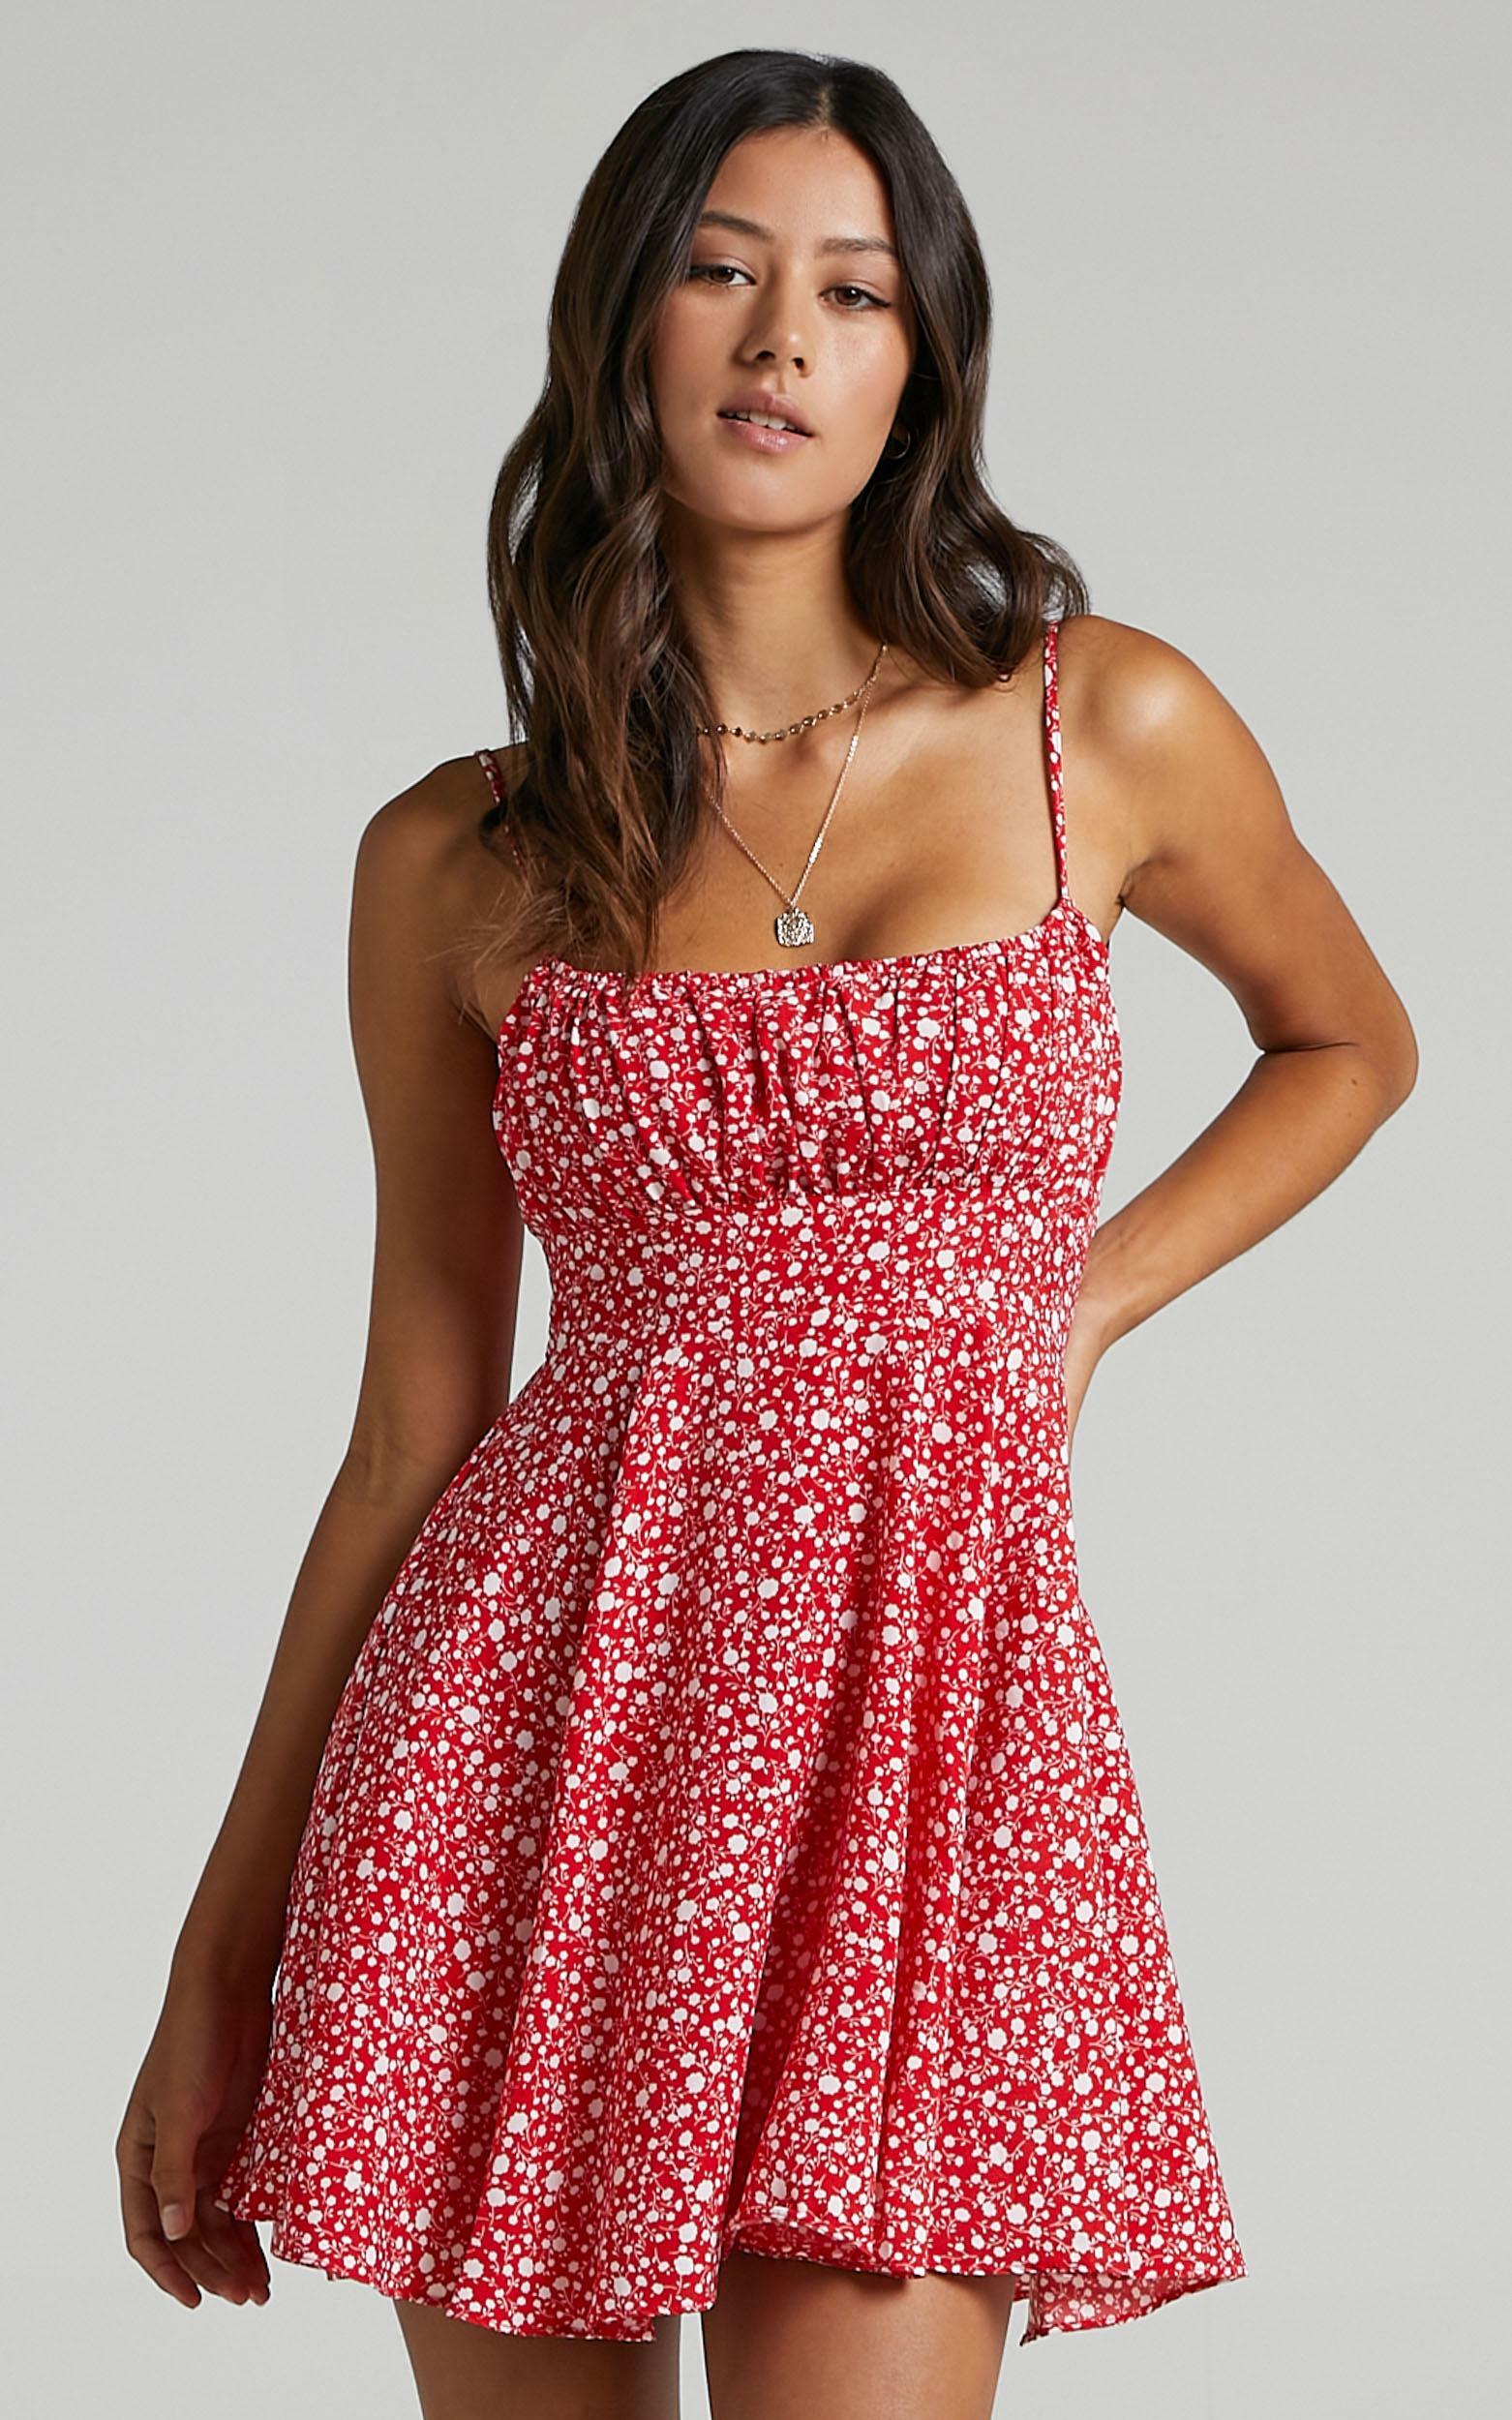 Summer Jam Sweetheart Mini Dress in Red Floral Print - 04, RED5, hi-res image number null